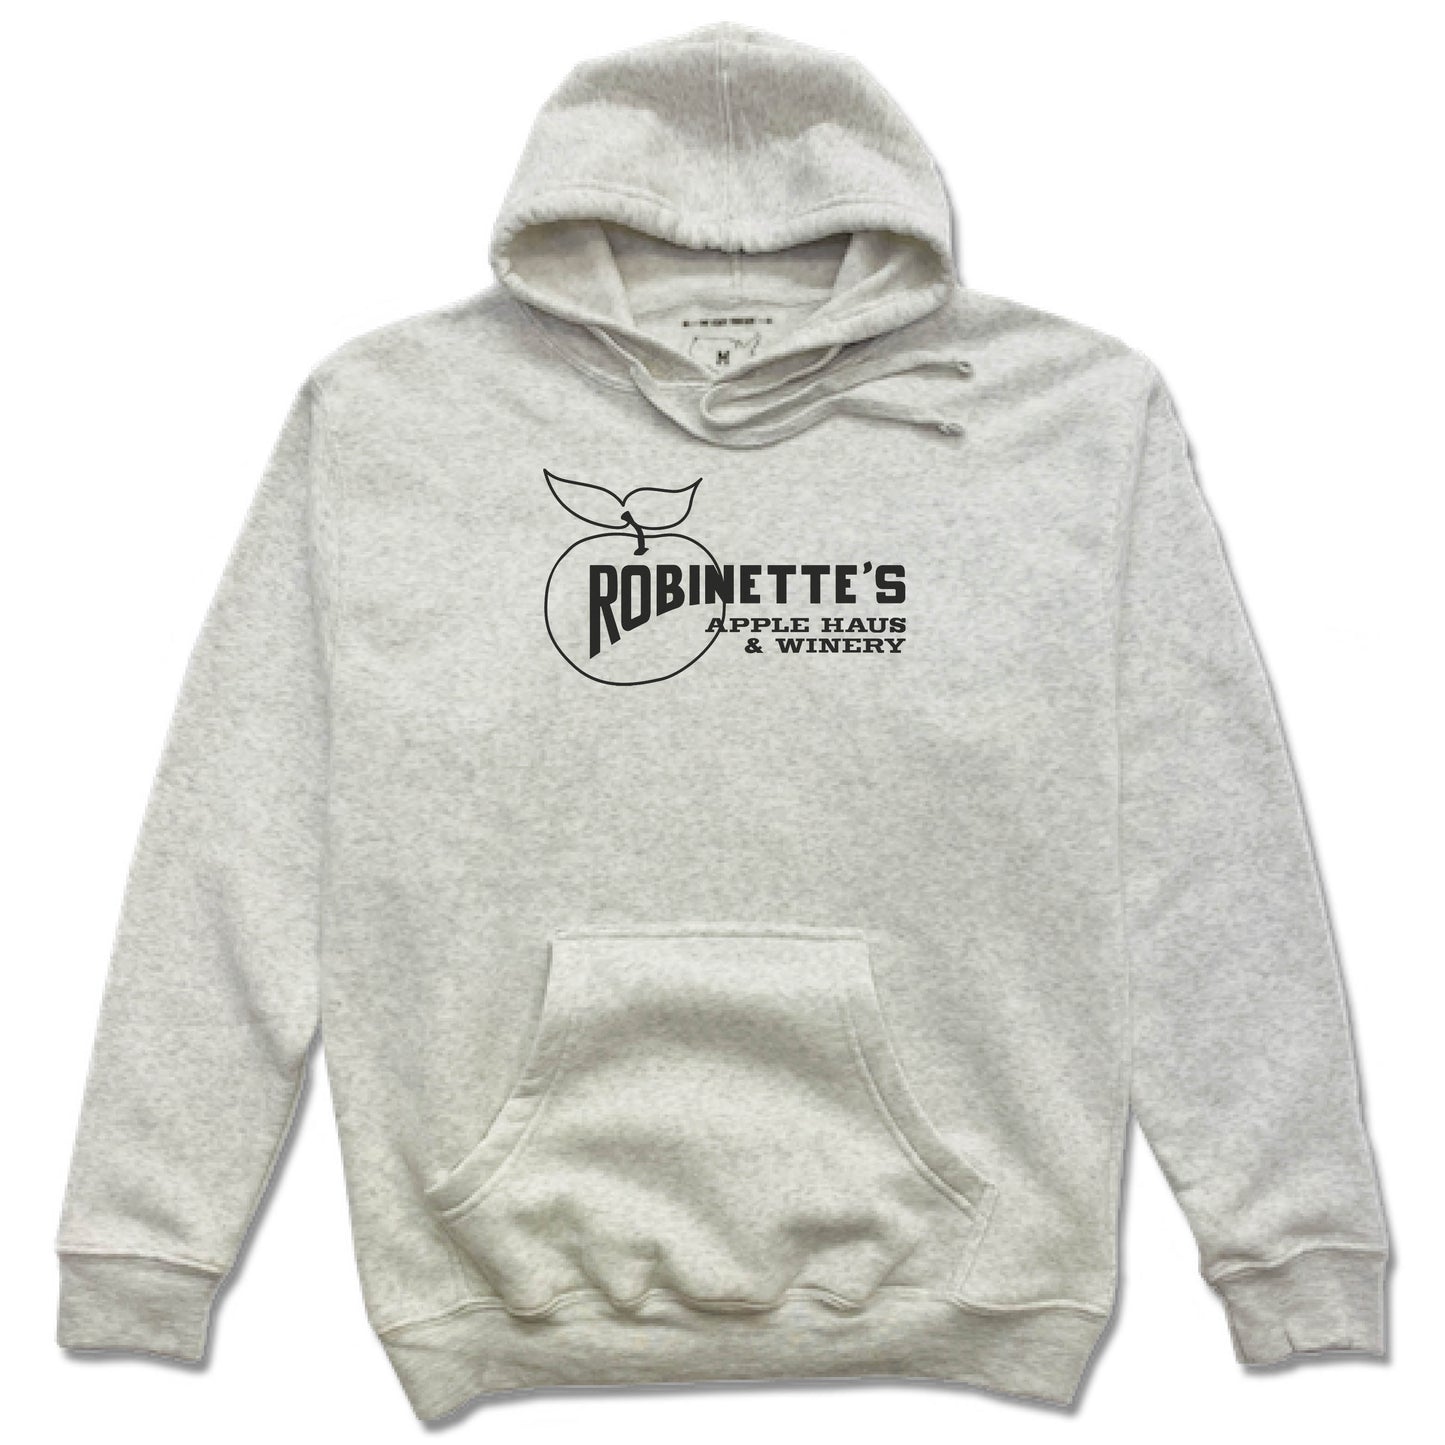 ROBINETTE'S APPLE HAUS & WINERY | FRENCH TERRY HOODIE | LOGO